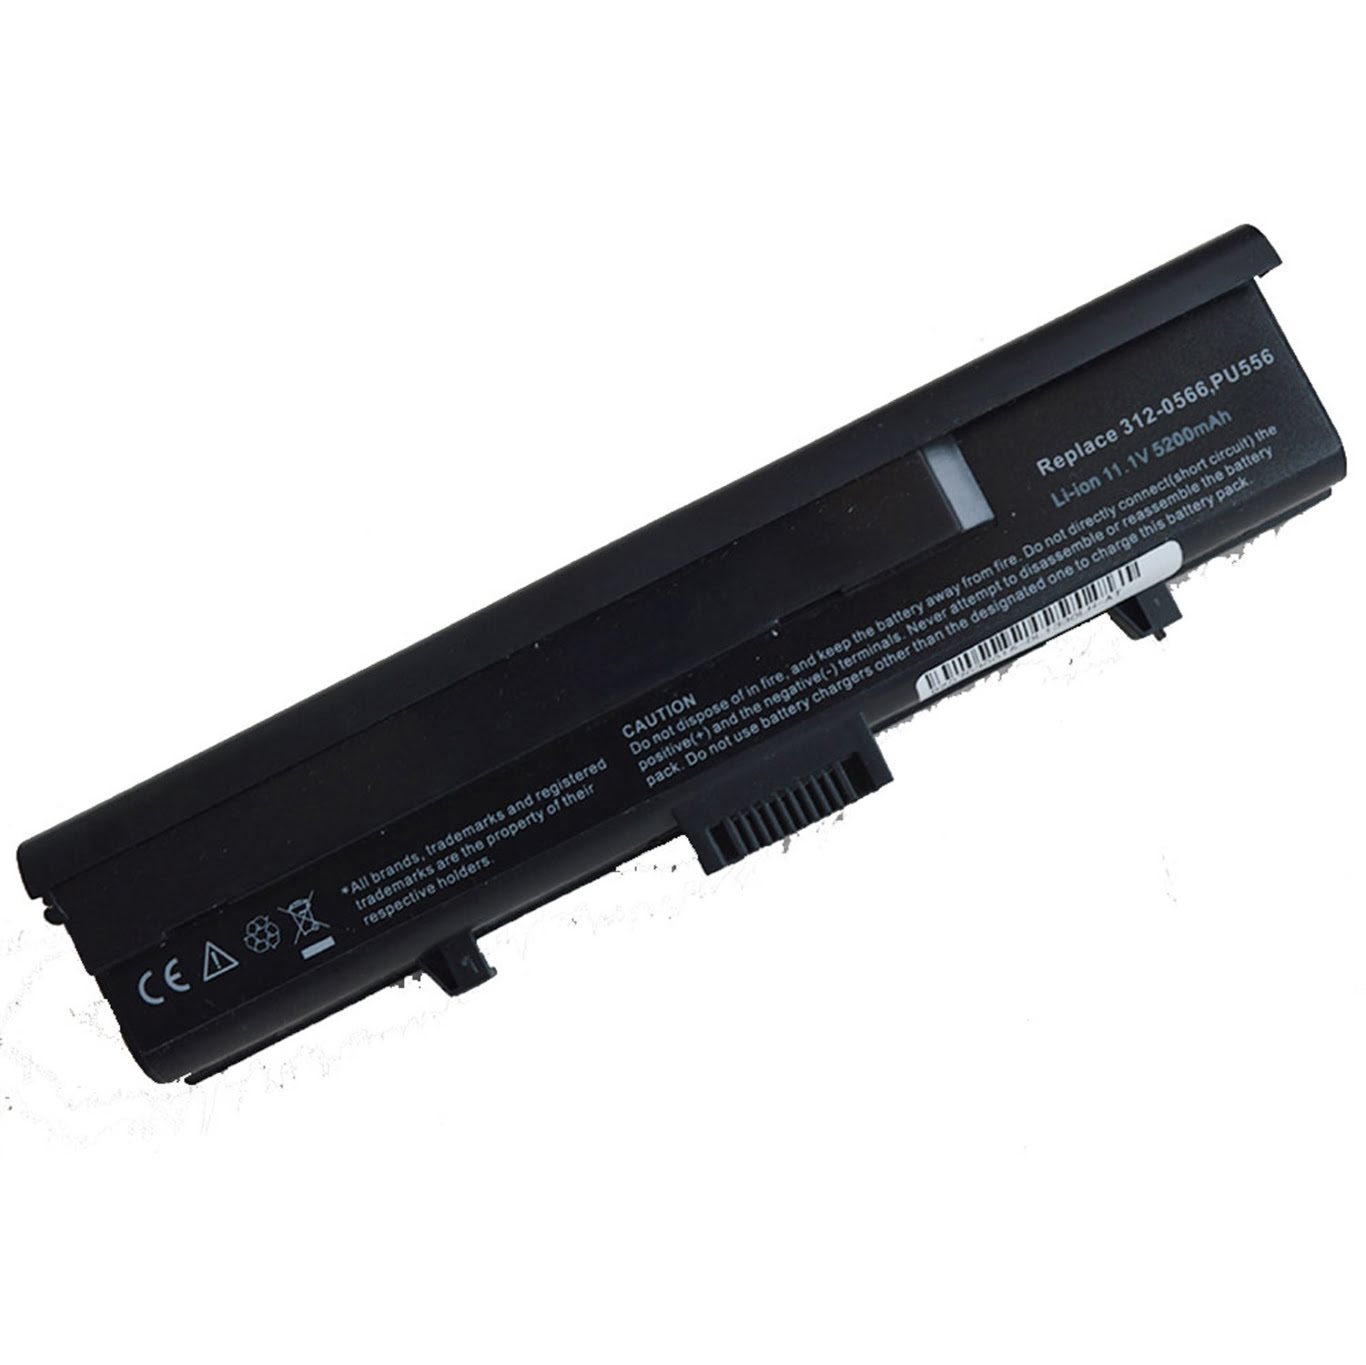 Dell 0cr036, 0du128 Laptop Battery For Inspiron 1318, Xps M1330 replacement